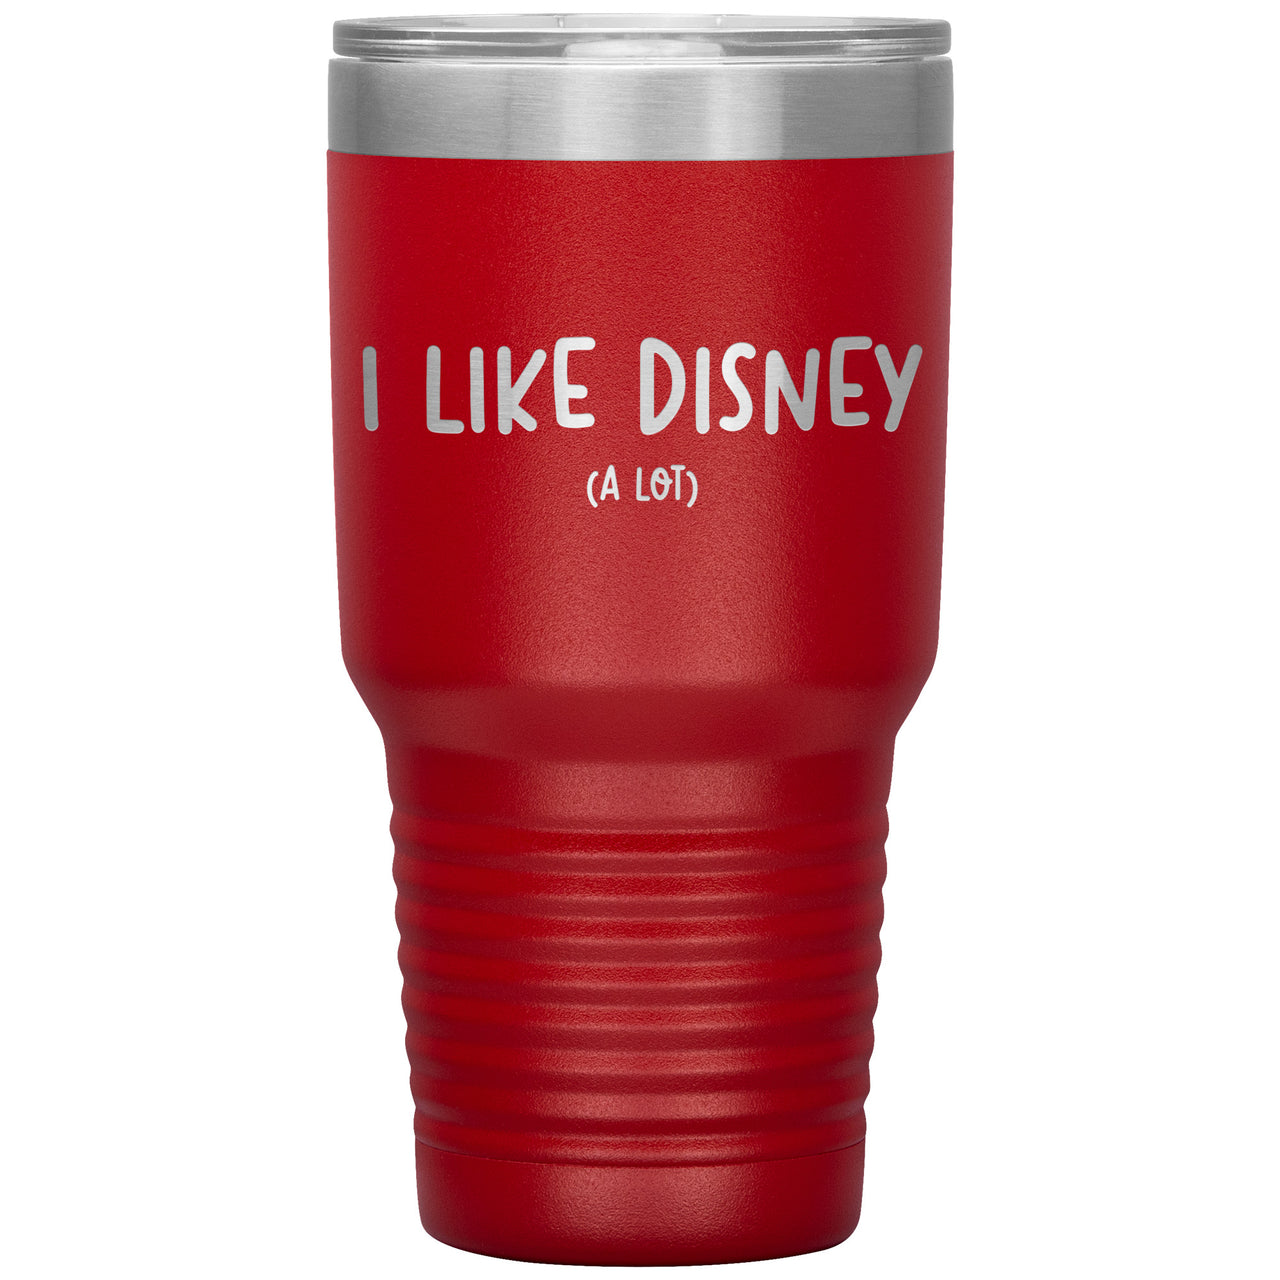 Big Sipper 30oz Tumbler with Straw & Handle